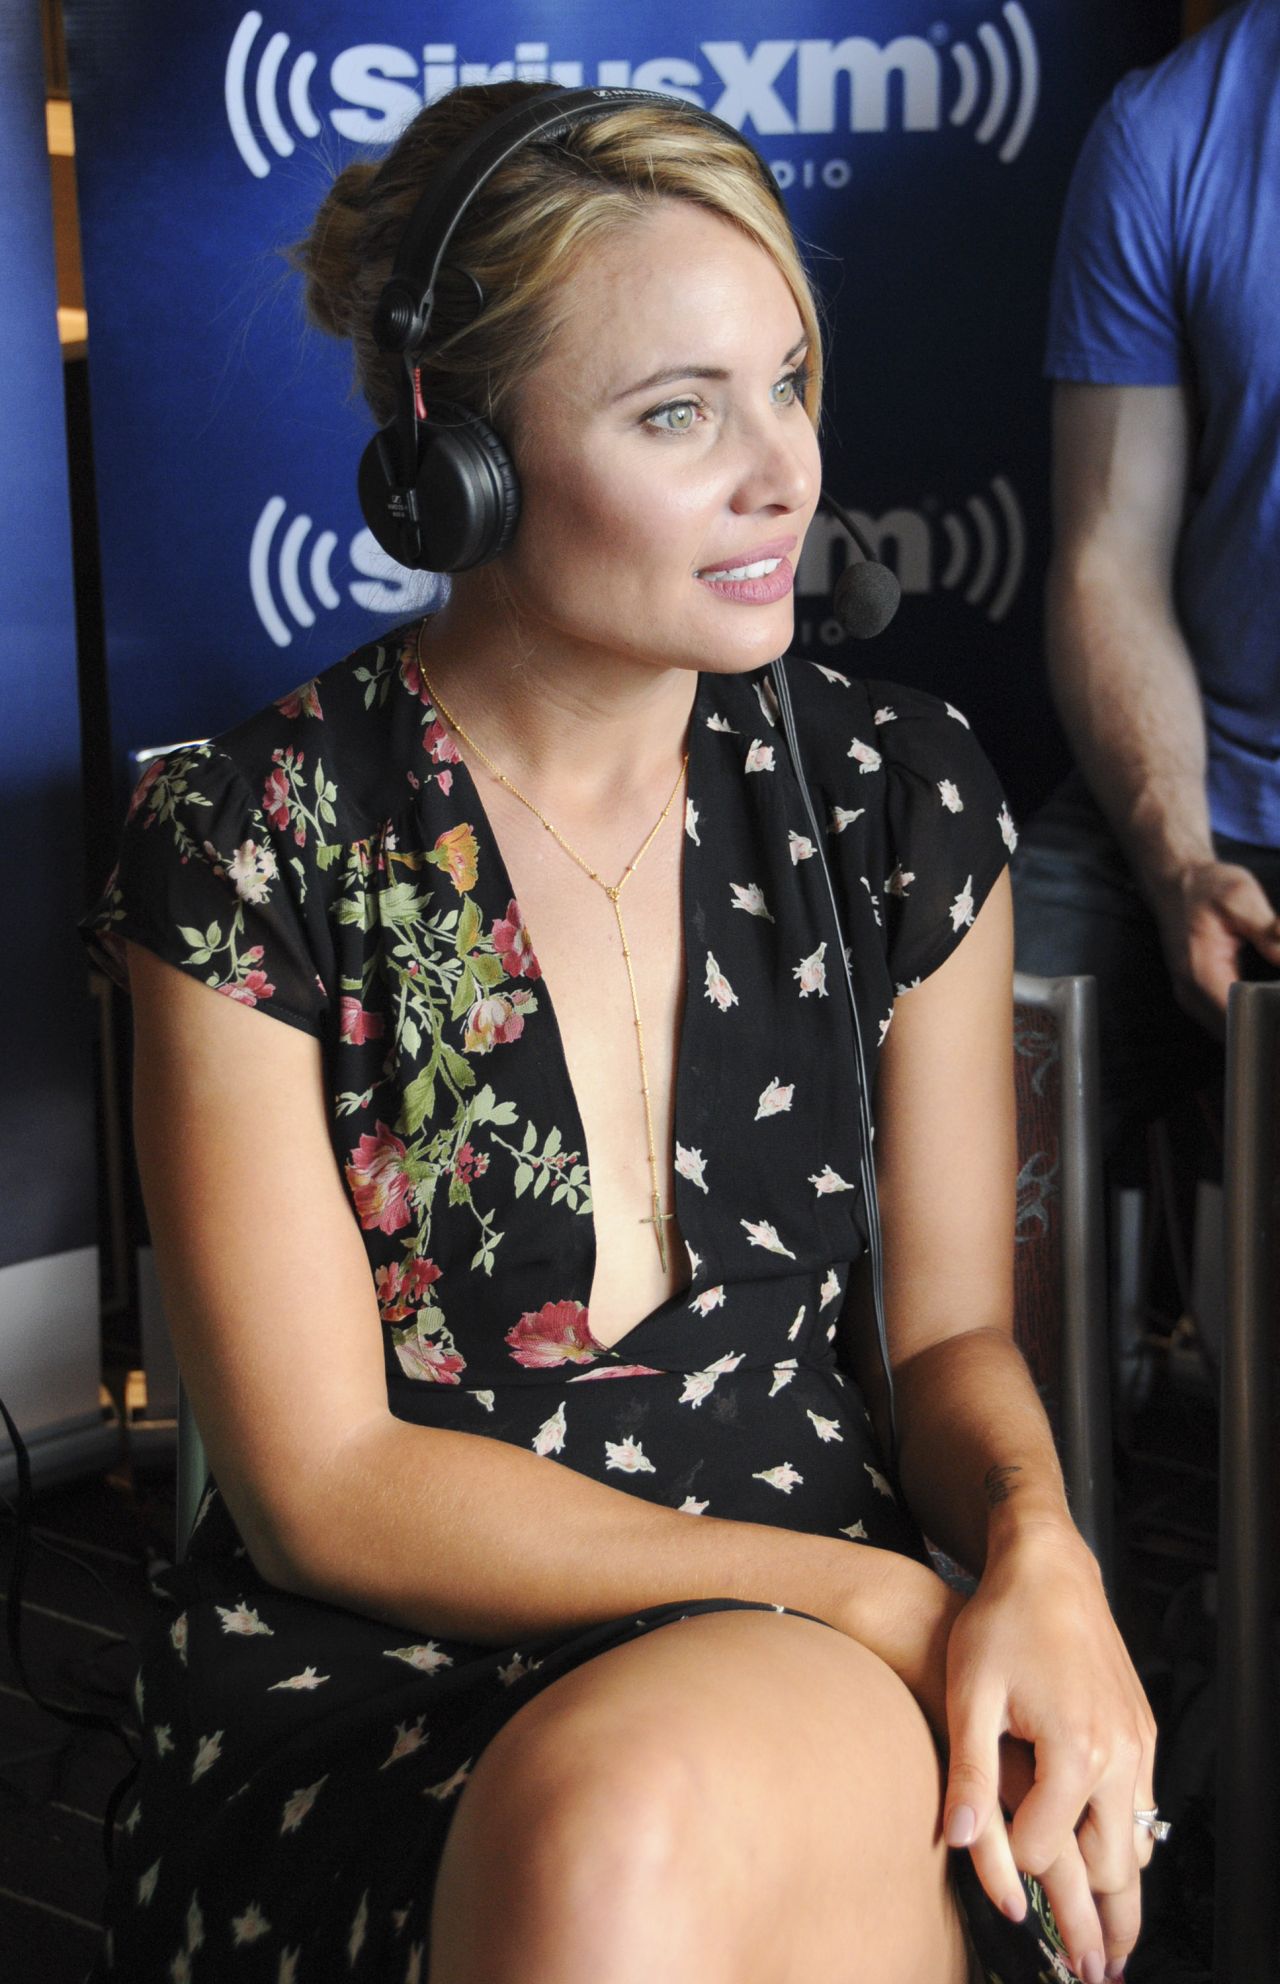 leah-pipes-siriusxm-s-ew-radio-channel-broadcasts-from-comic-con-in-san-die...